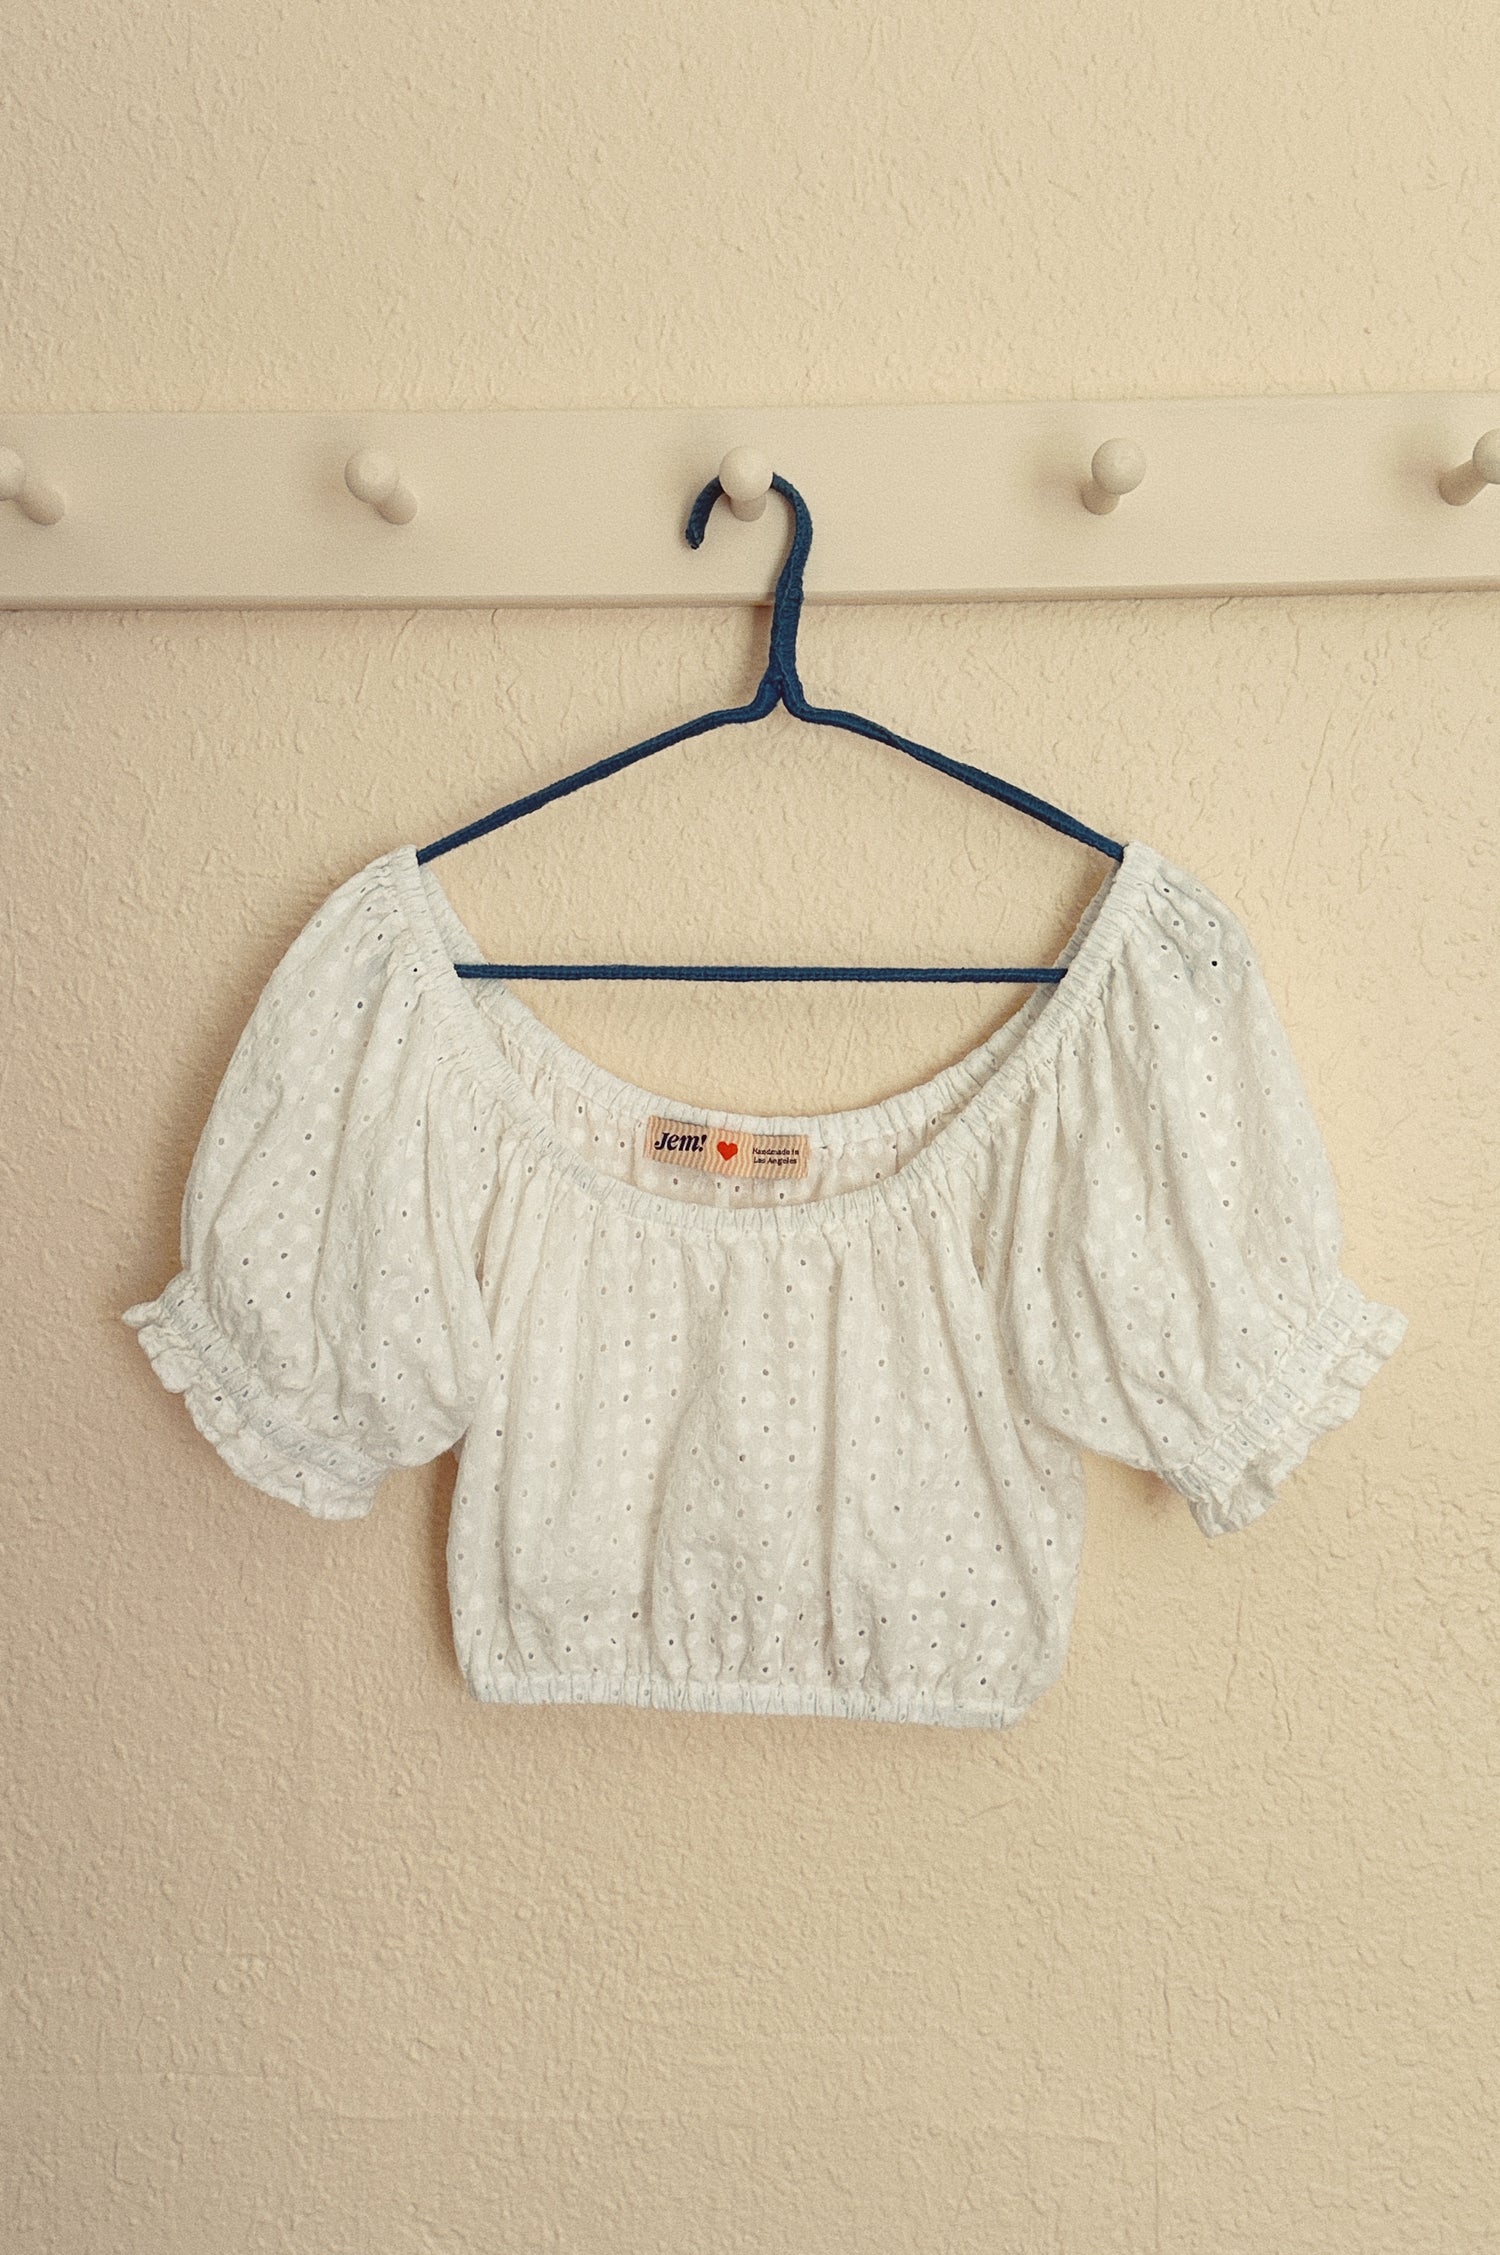 Made to order Clementine Tops